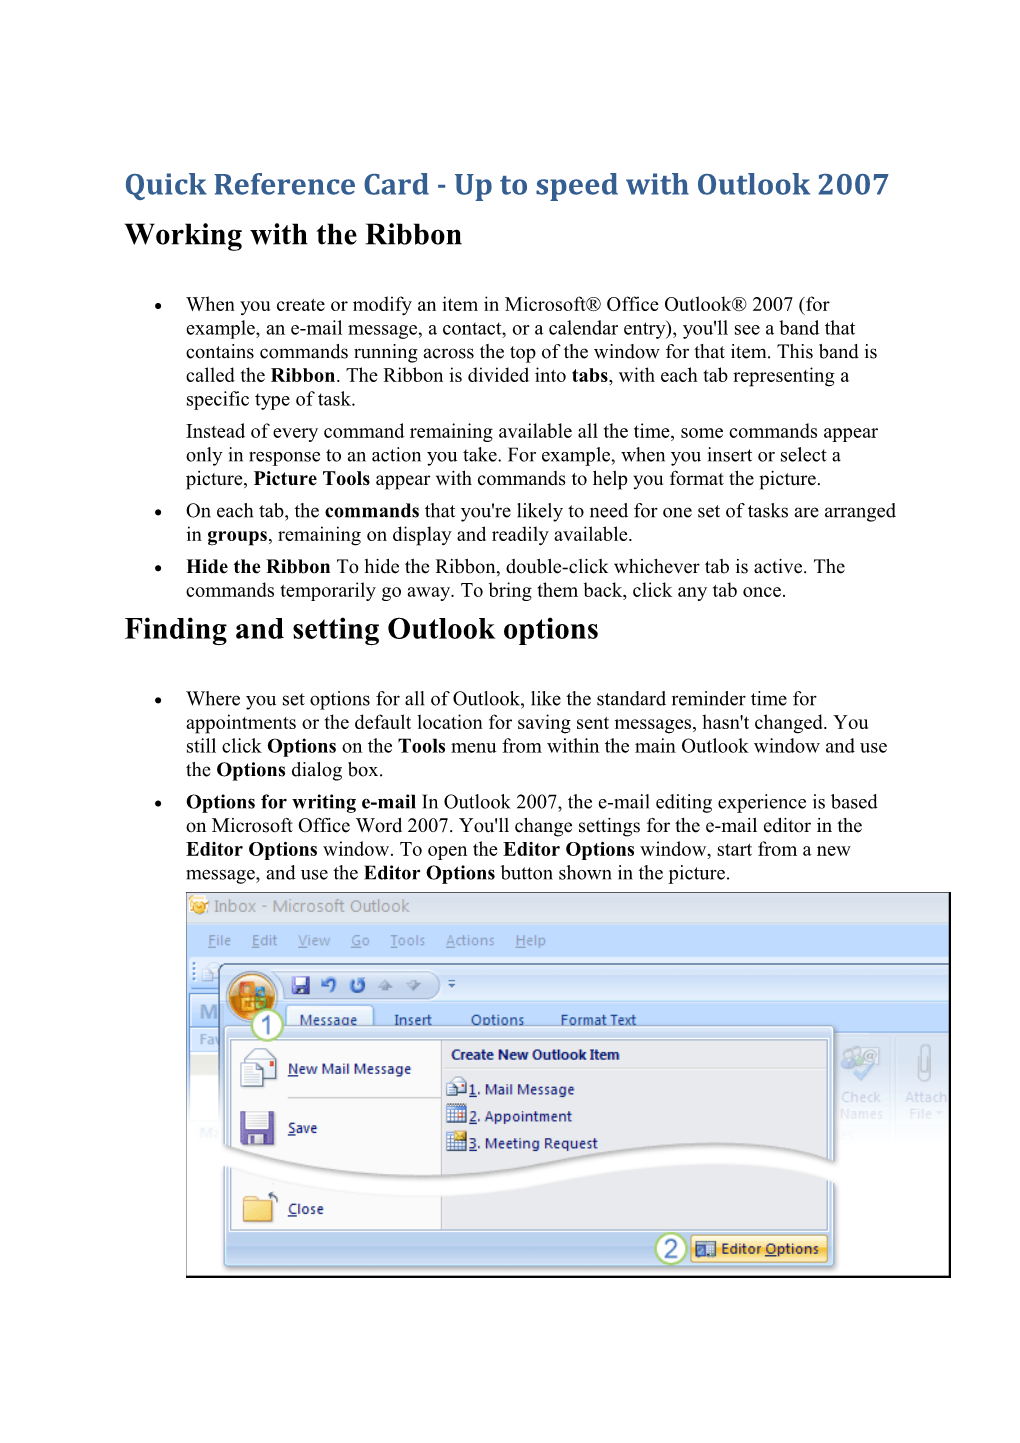 Quick Reference Card - up to Speed with Outlook 2007